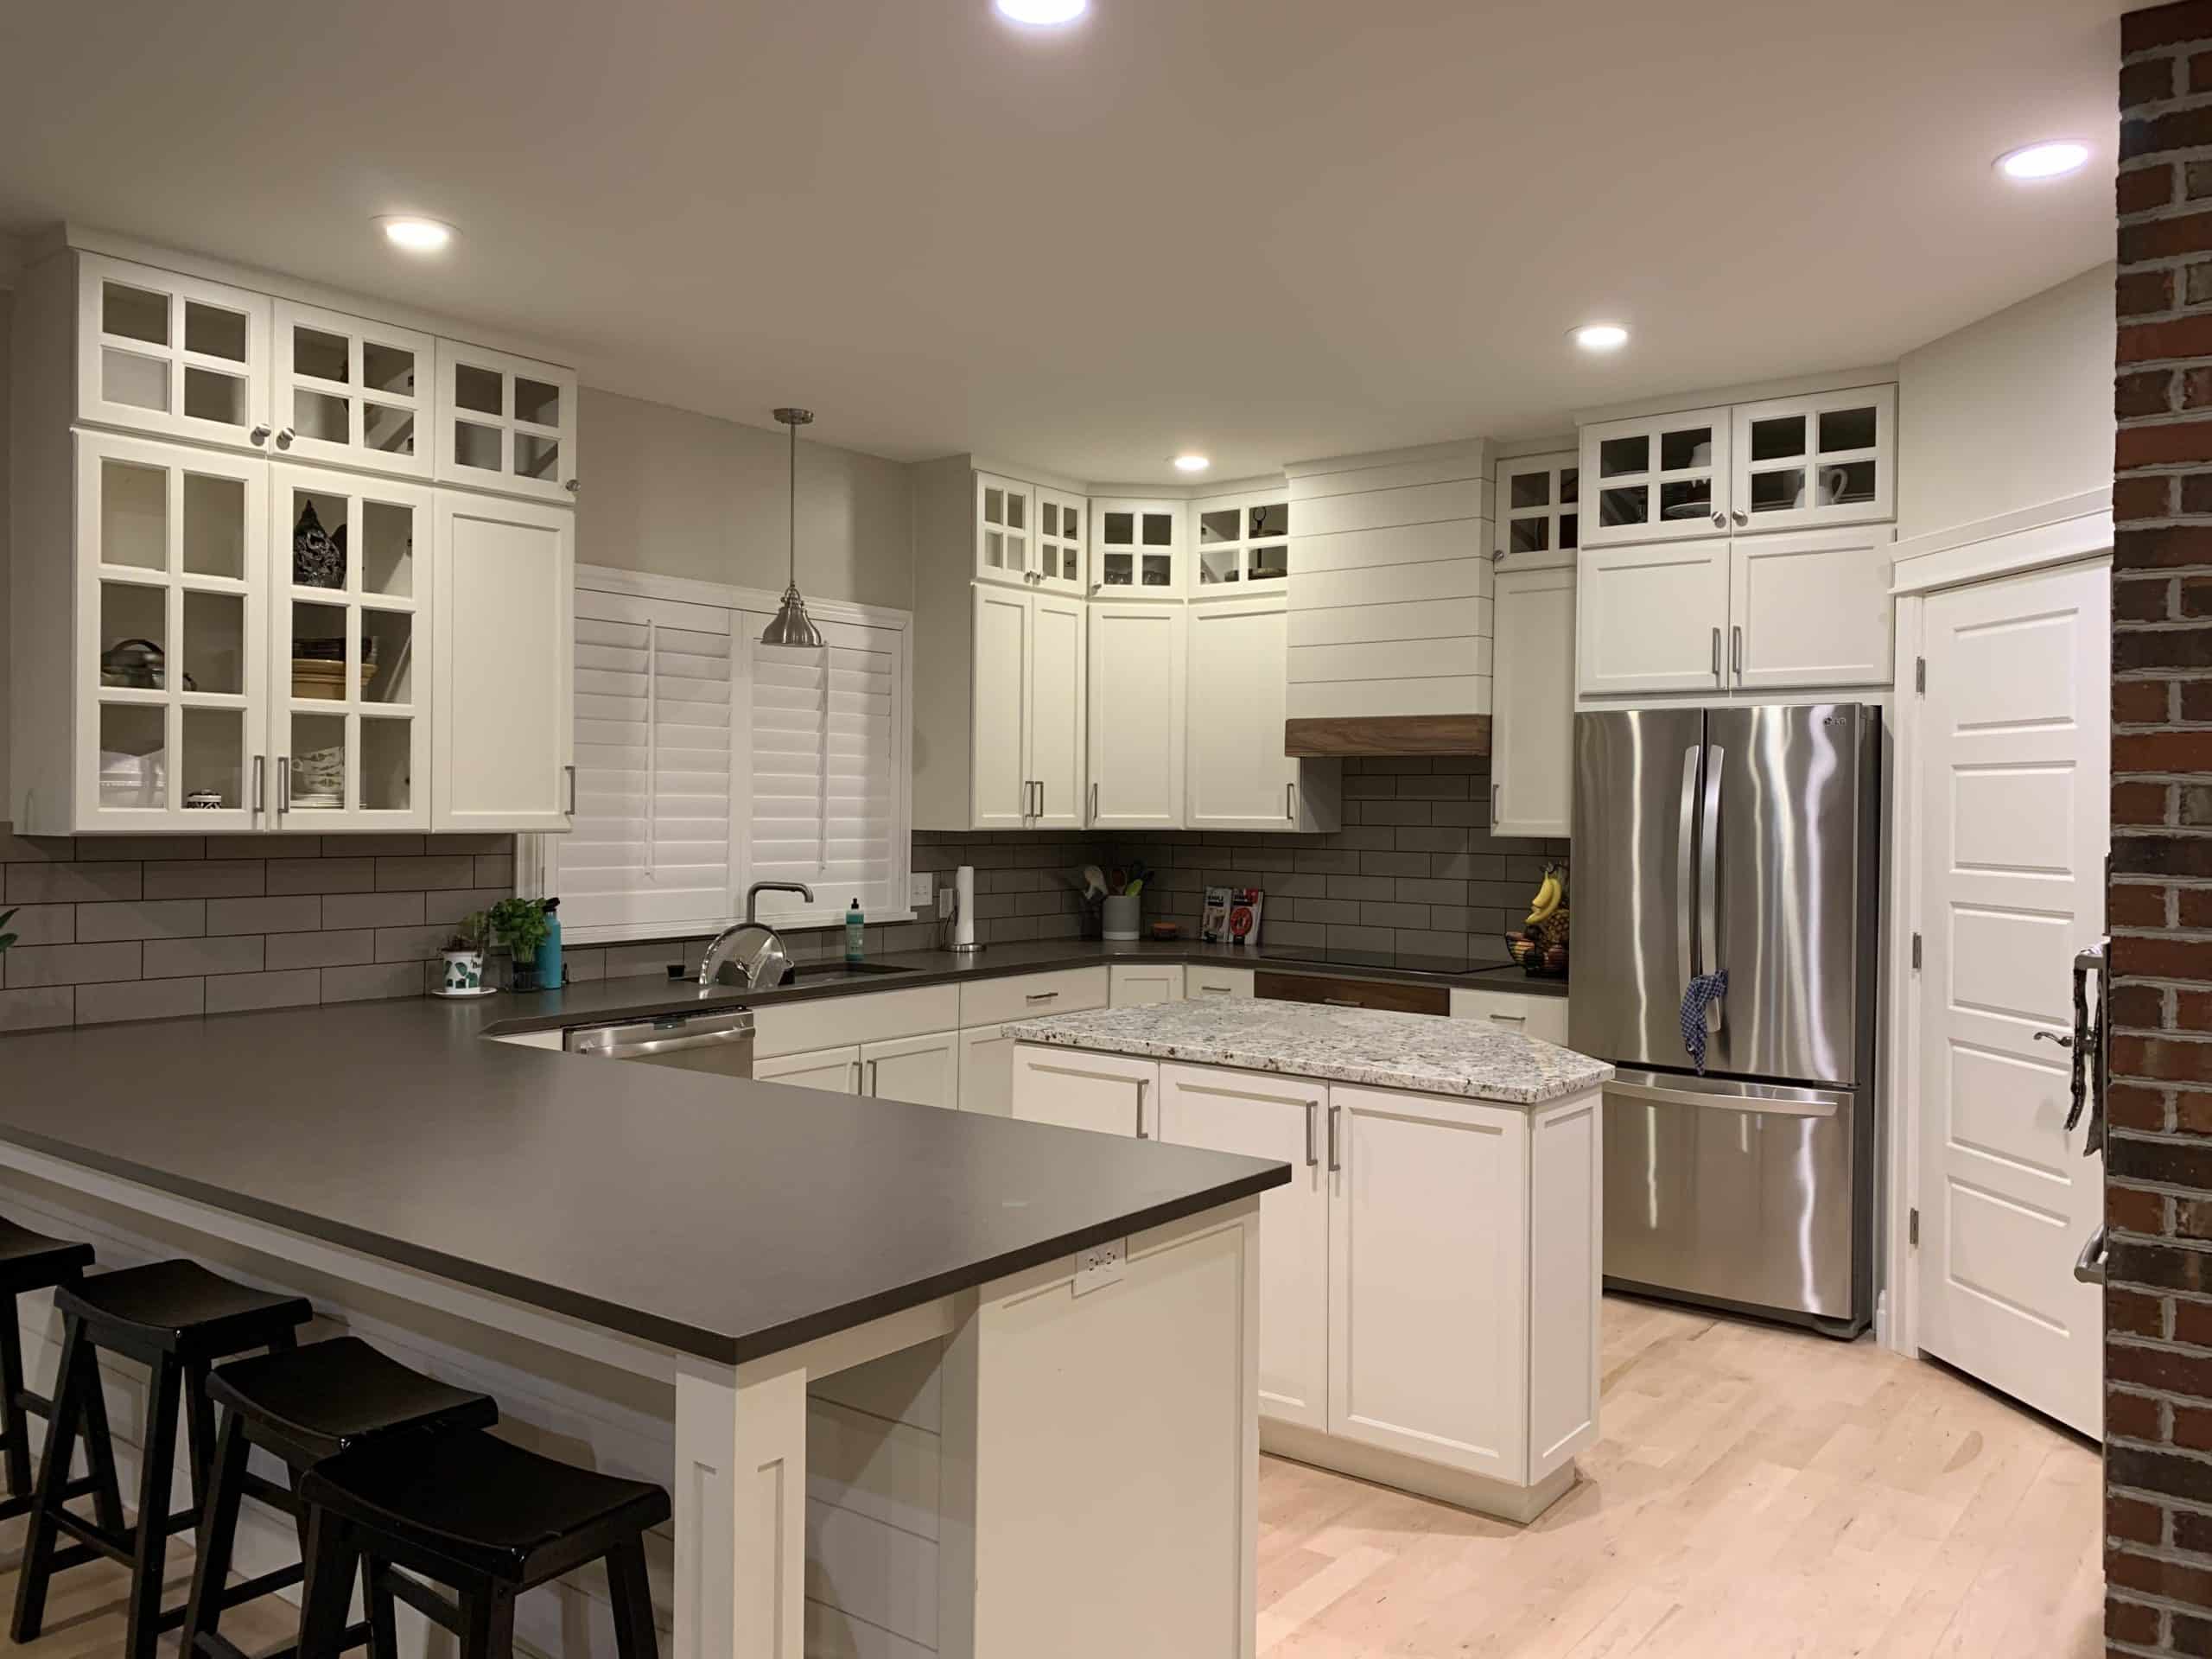 6 Important Aspects Of A Kitchen Remodel To Keep In Mind